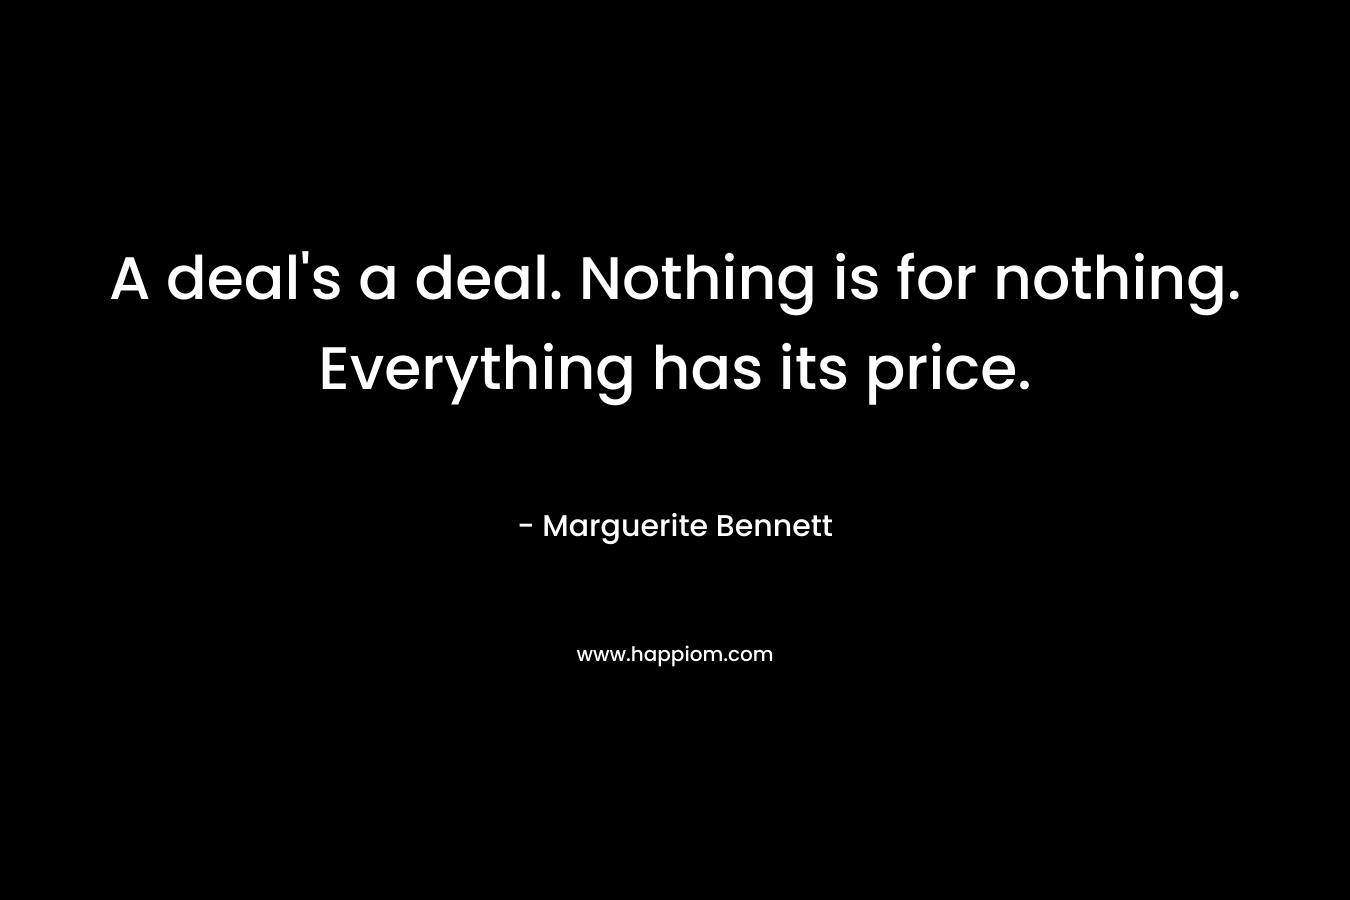 A deal's a deal. Nothing is for nothing. Everything has its price.